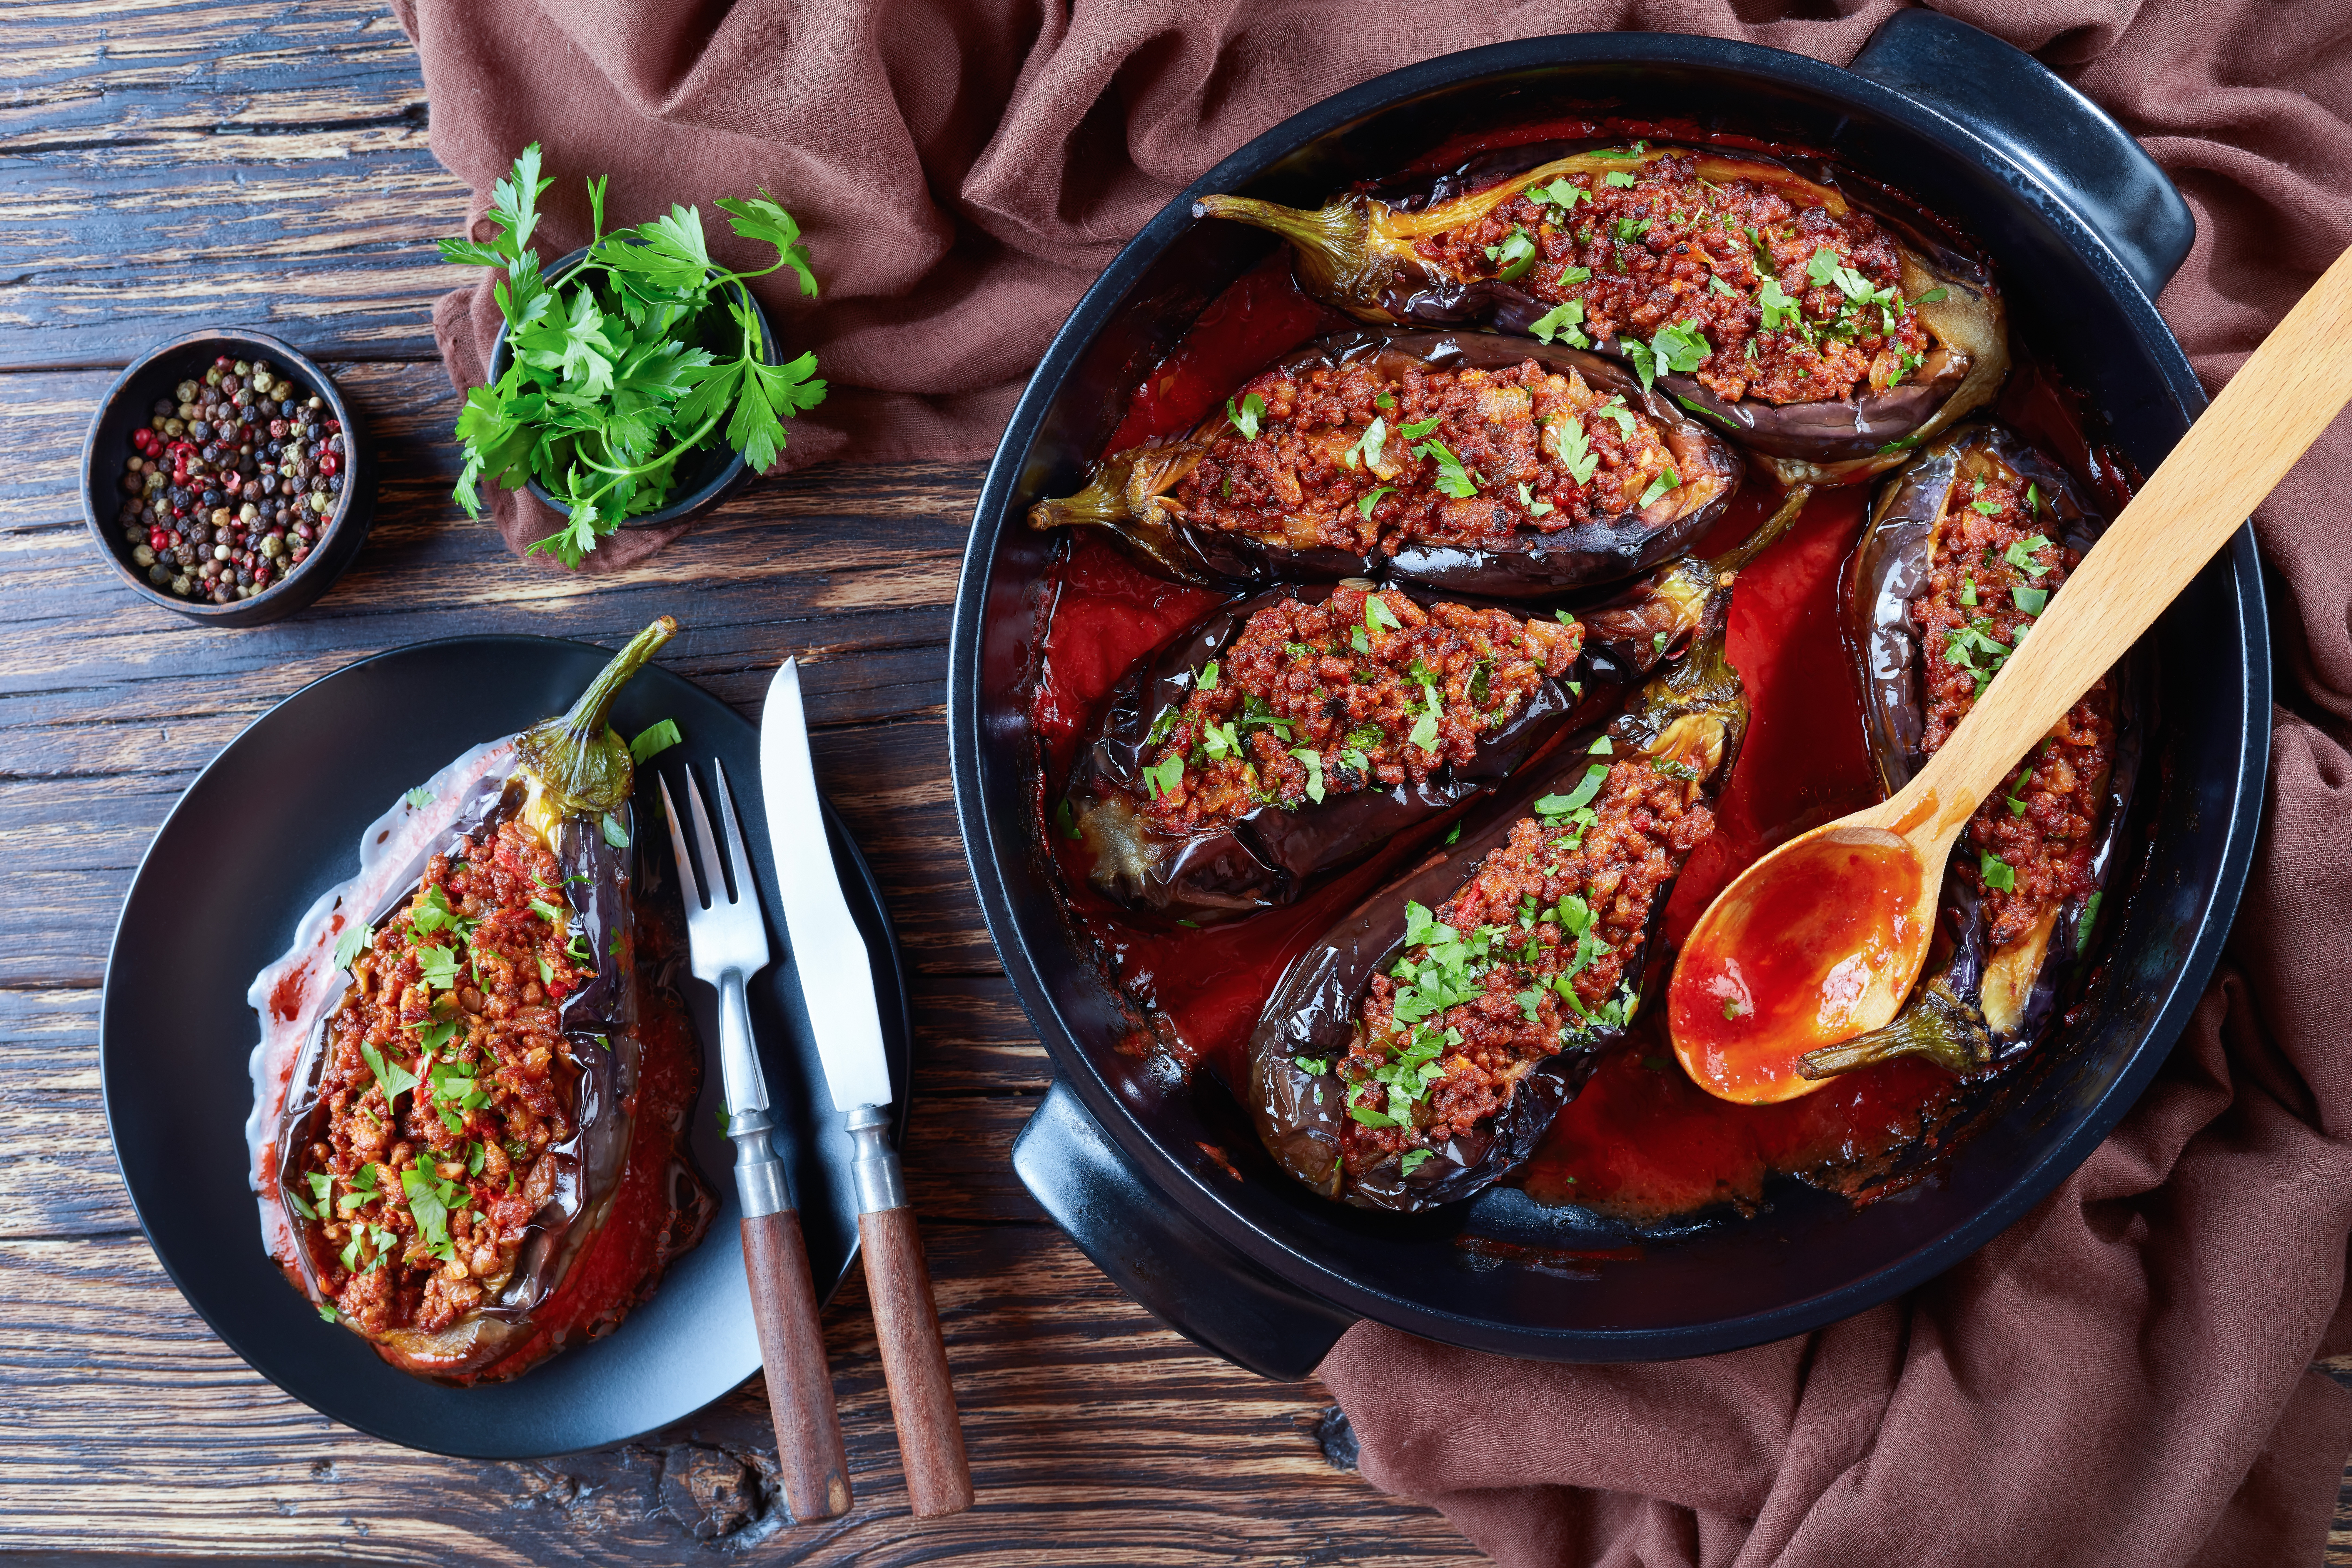 karniyarik-stuffed-eggplants-aubergines-with-ground-beef-vegetables-baked-with-tomato-sauce-served-plate-with-fork-knife-turkish-cuisine-horizontal-view-from-close-up-flatlay